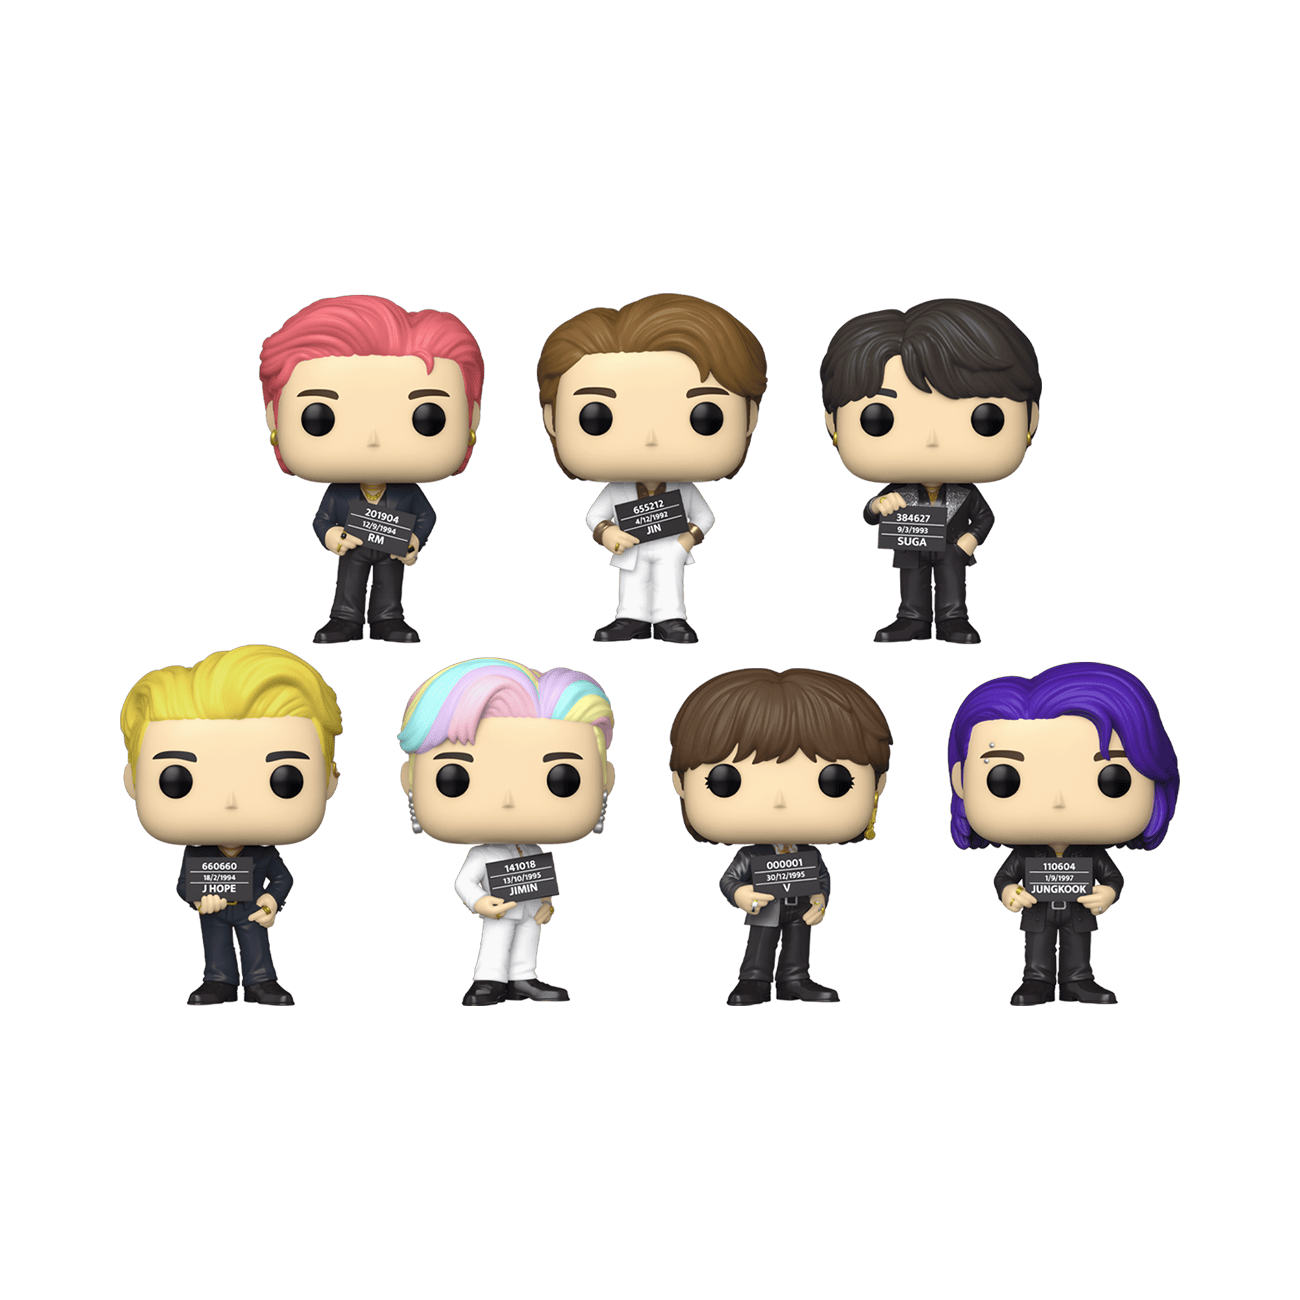 Here's A First Look At BTS's Updated But Unreleased Funko Pop